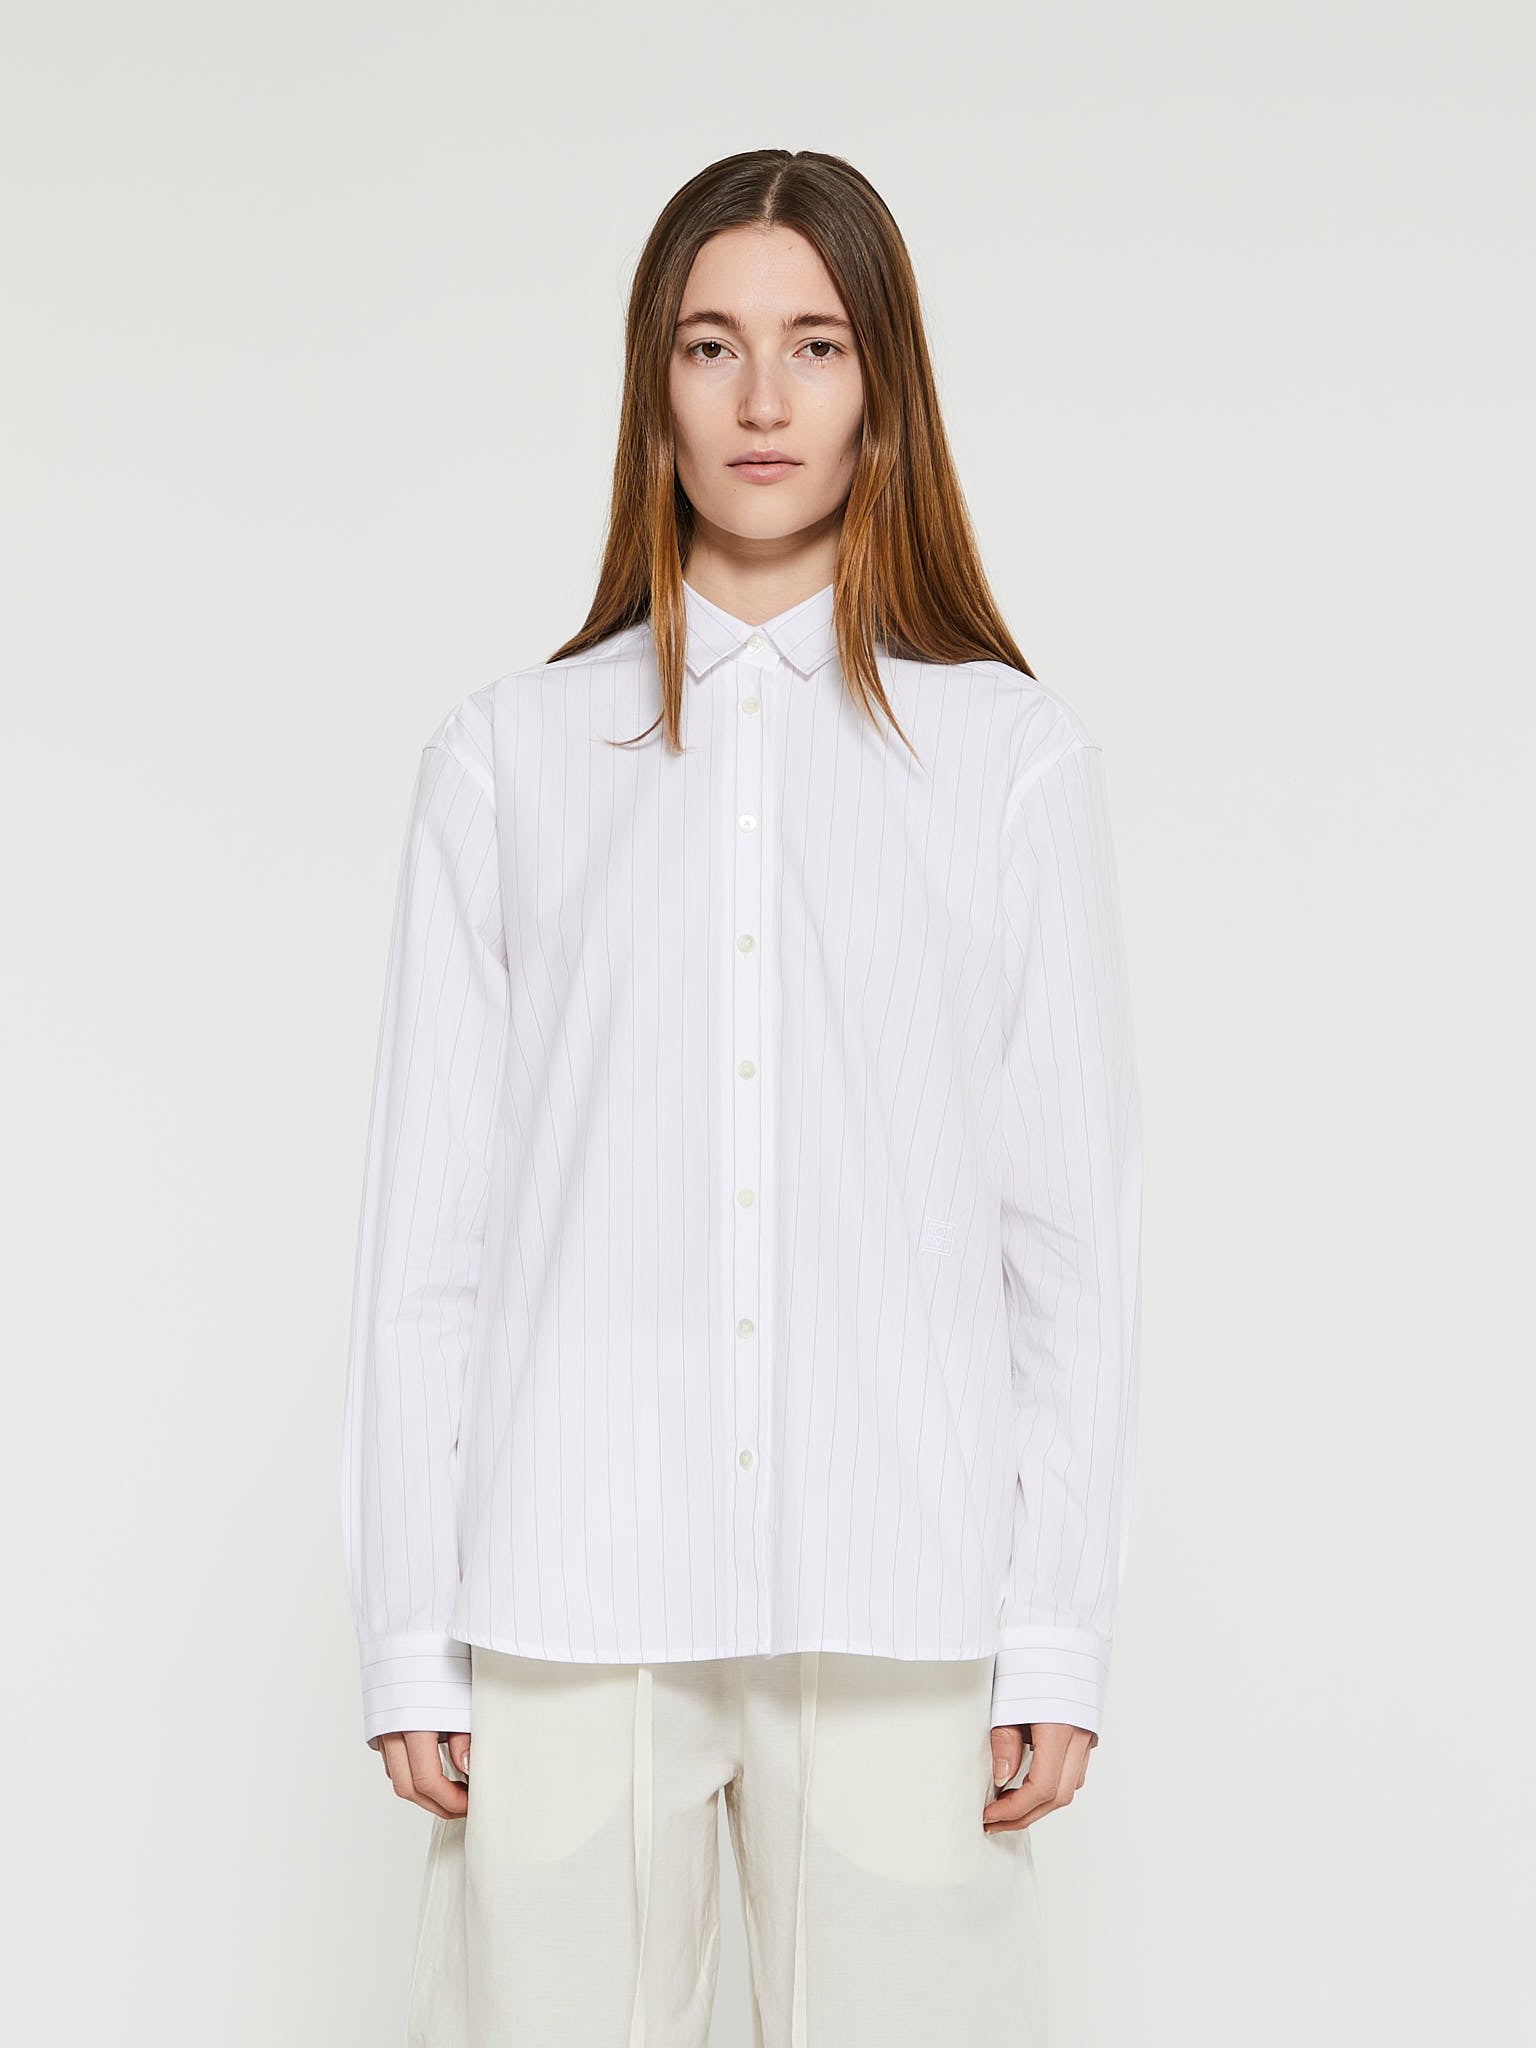 Toteme - Signature Cotton Shirt in White and Ochre Pinstripe